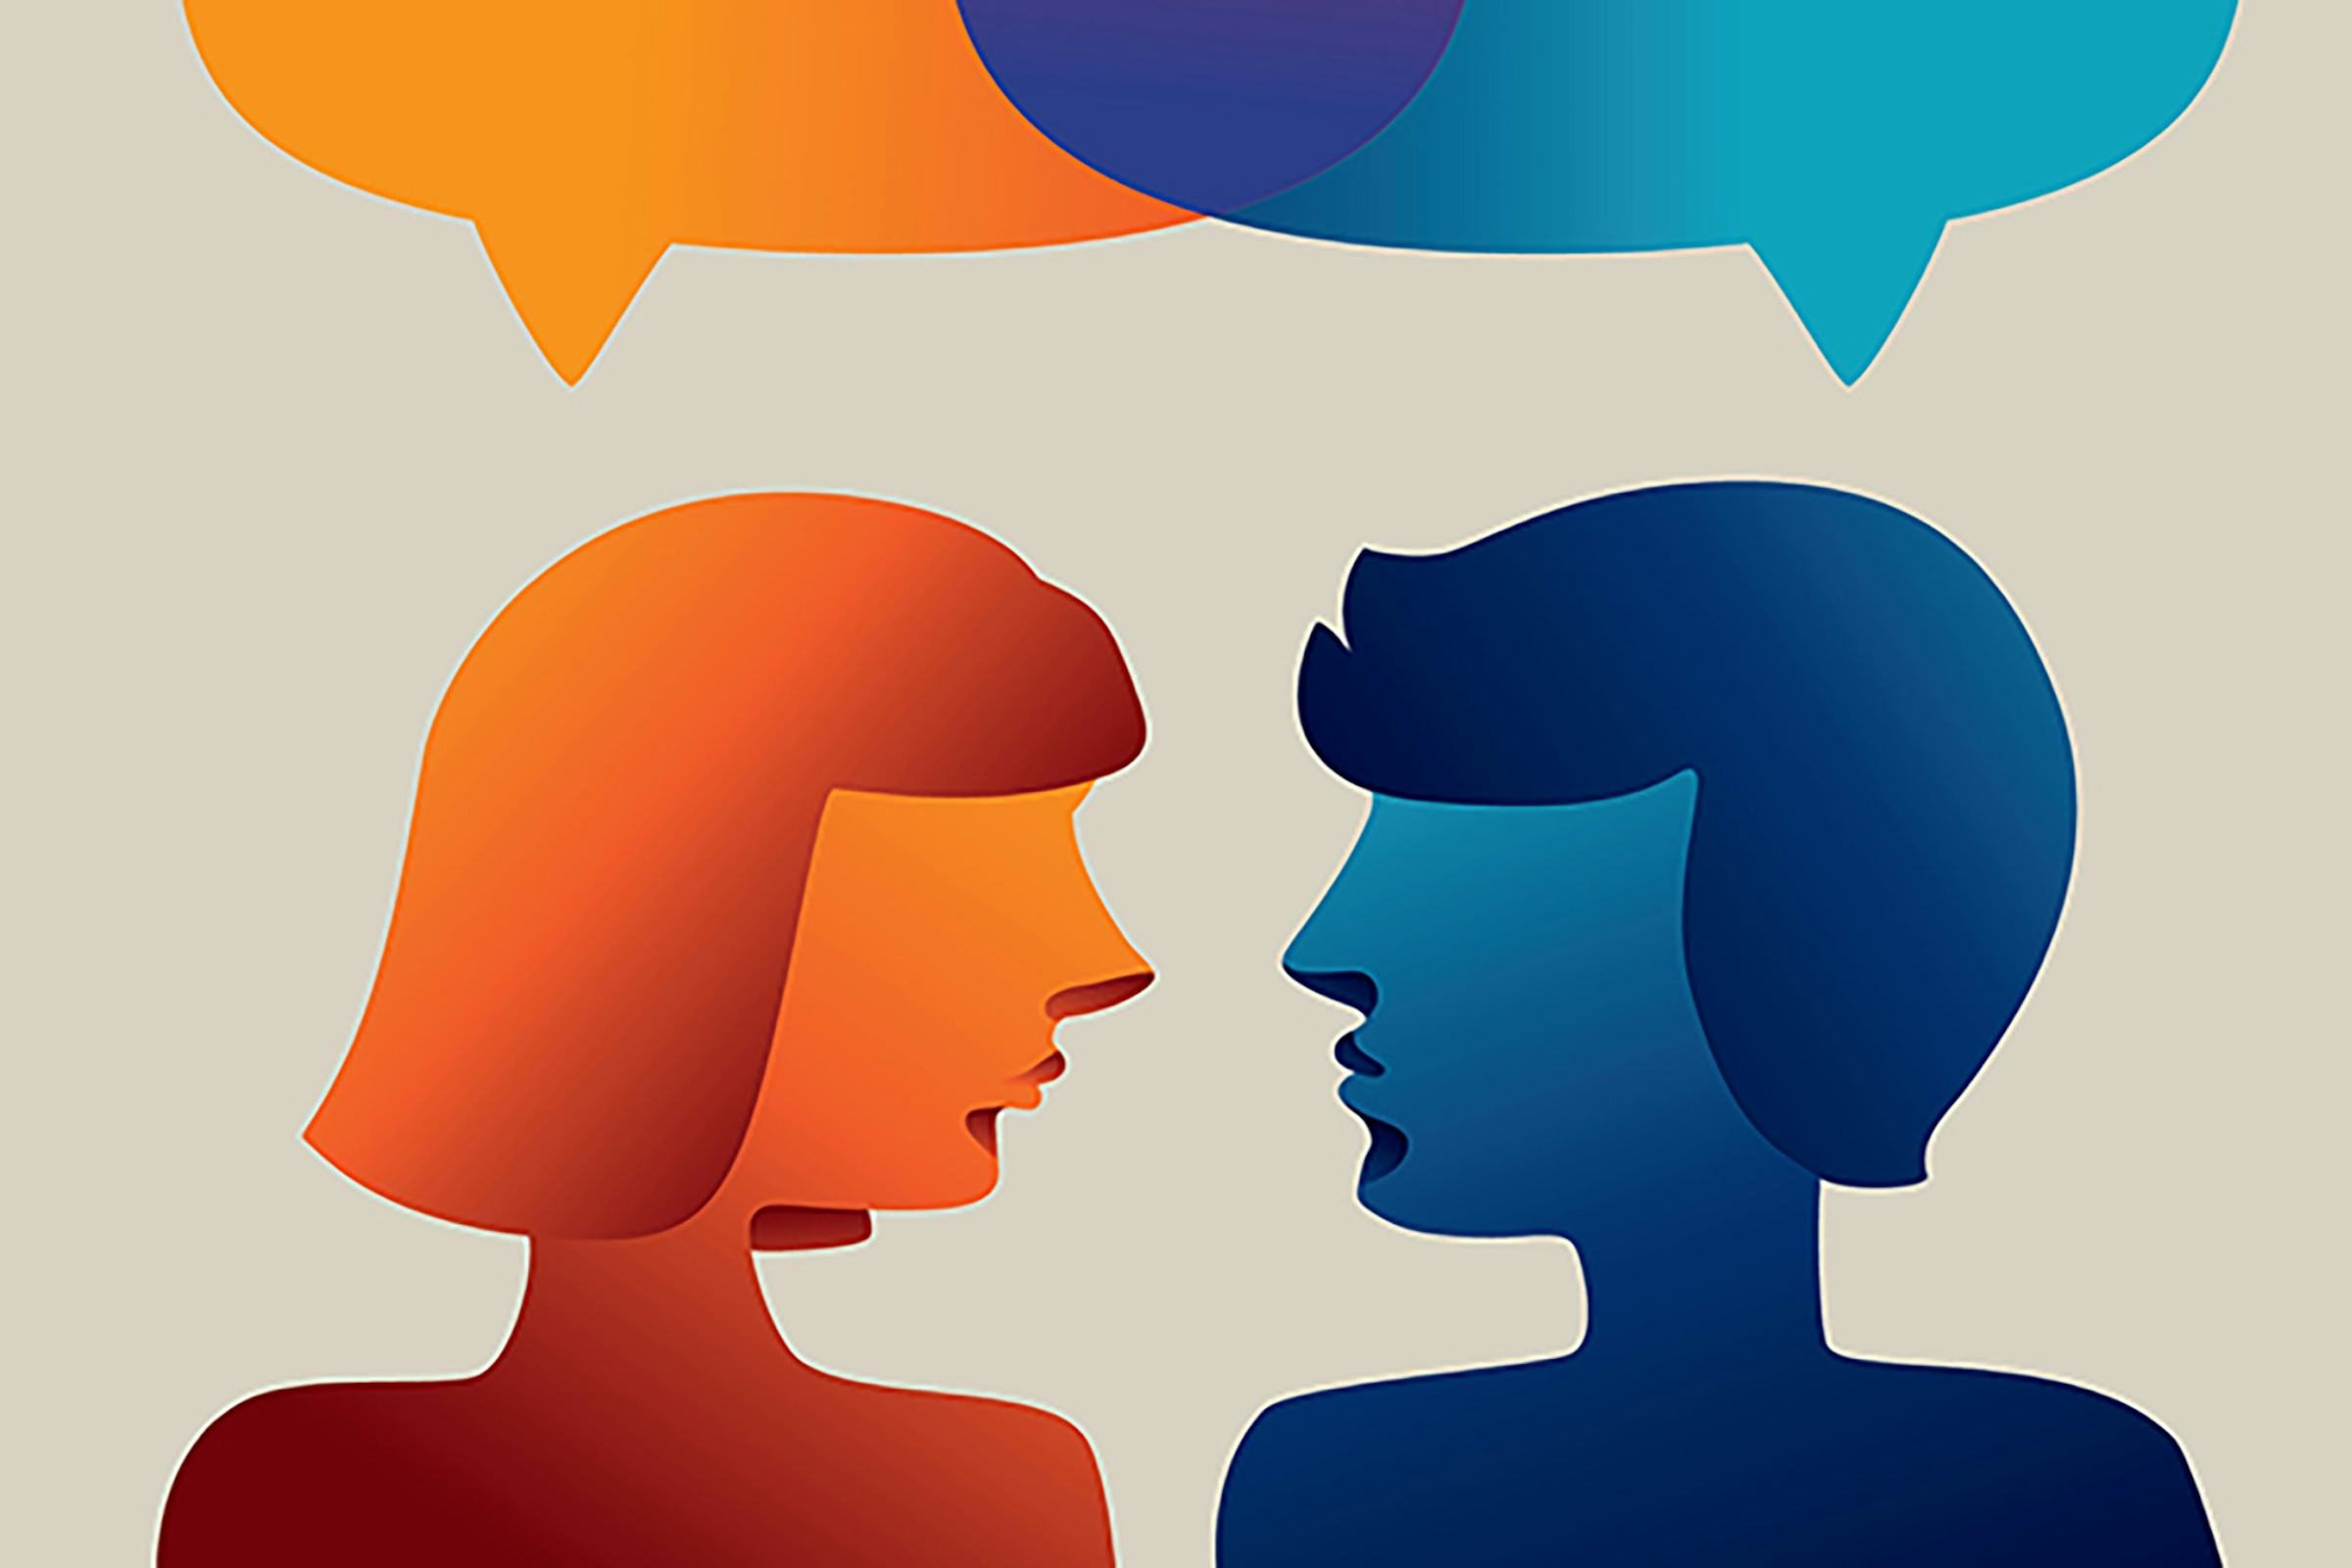 Illustration of two people speaking with word bubbles over their heads